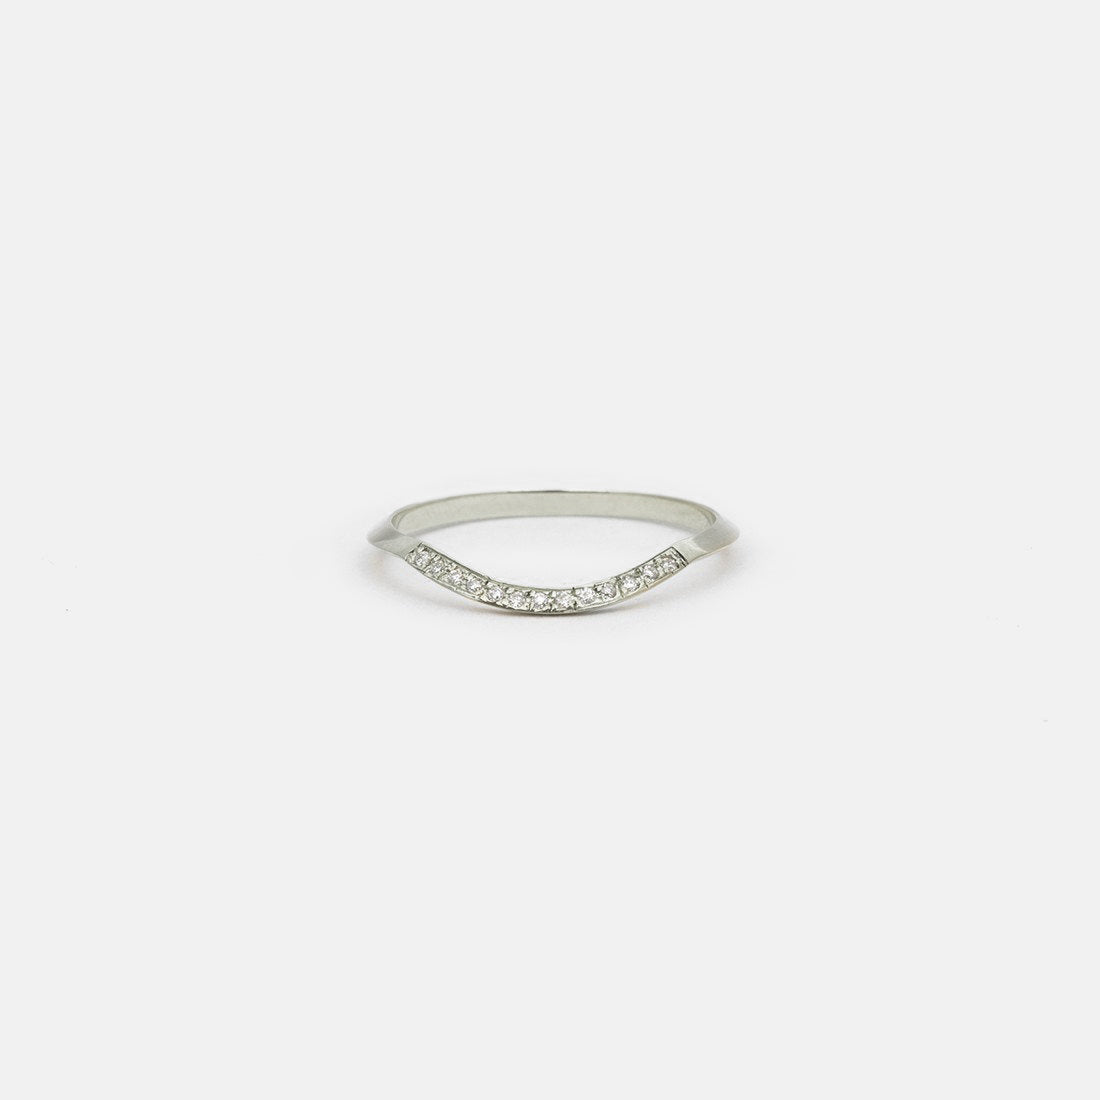 Arba Non-Traditional Ring in 14k  White Gold set with White Diamonds By SHW Fine Jewelry NYC